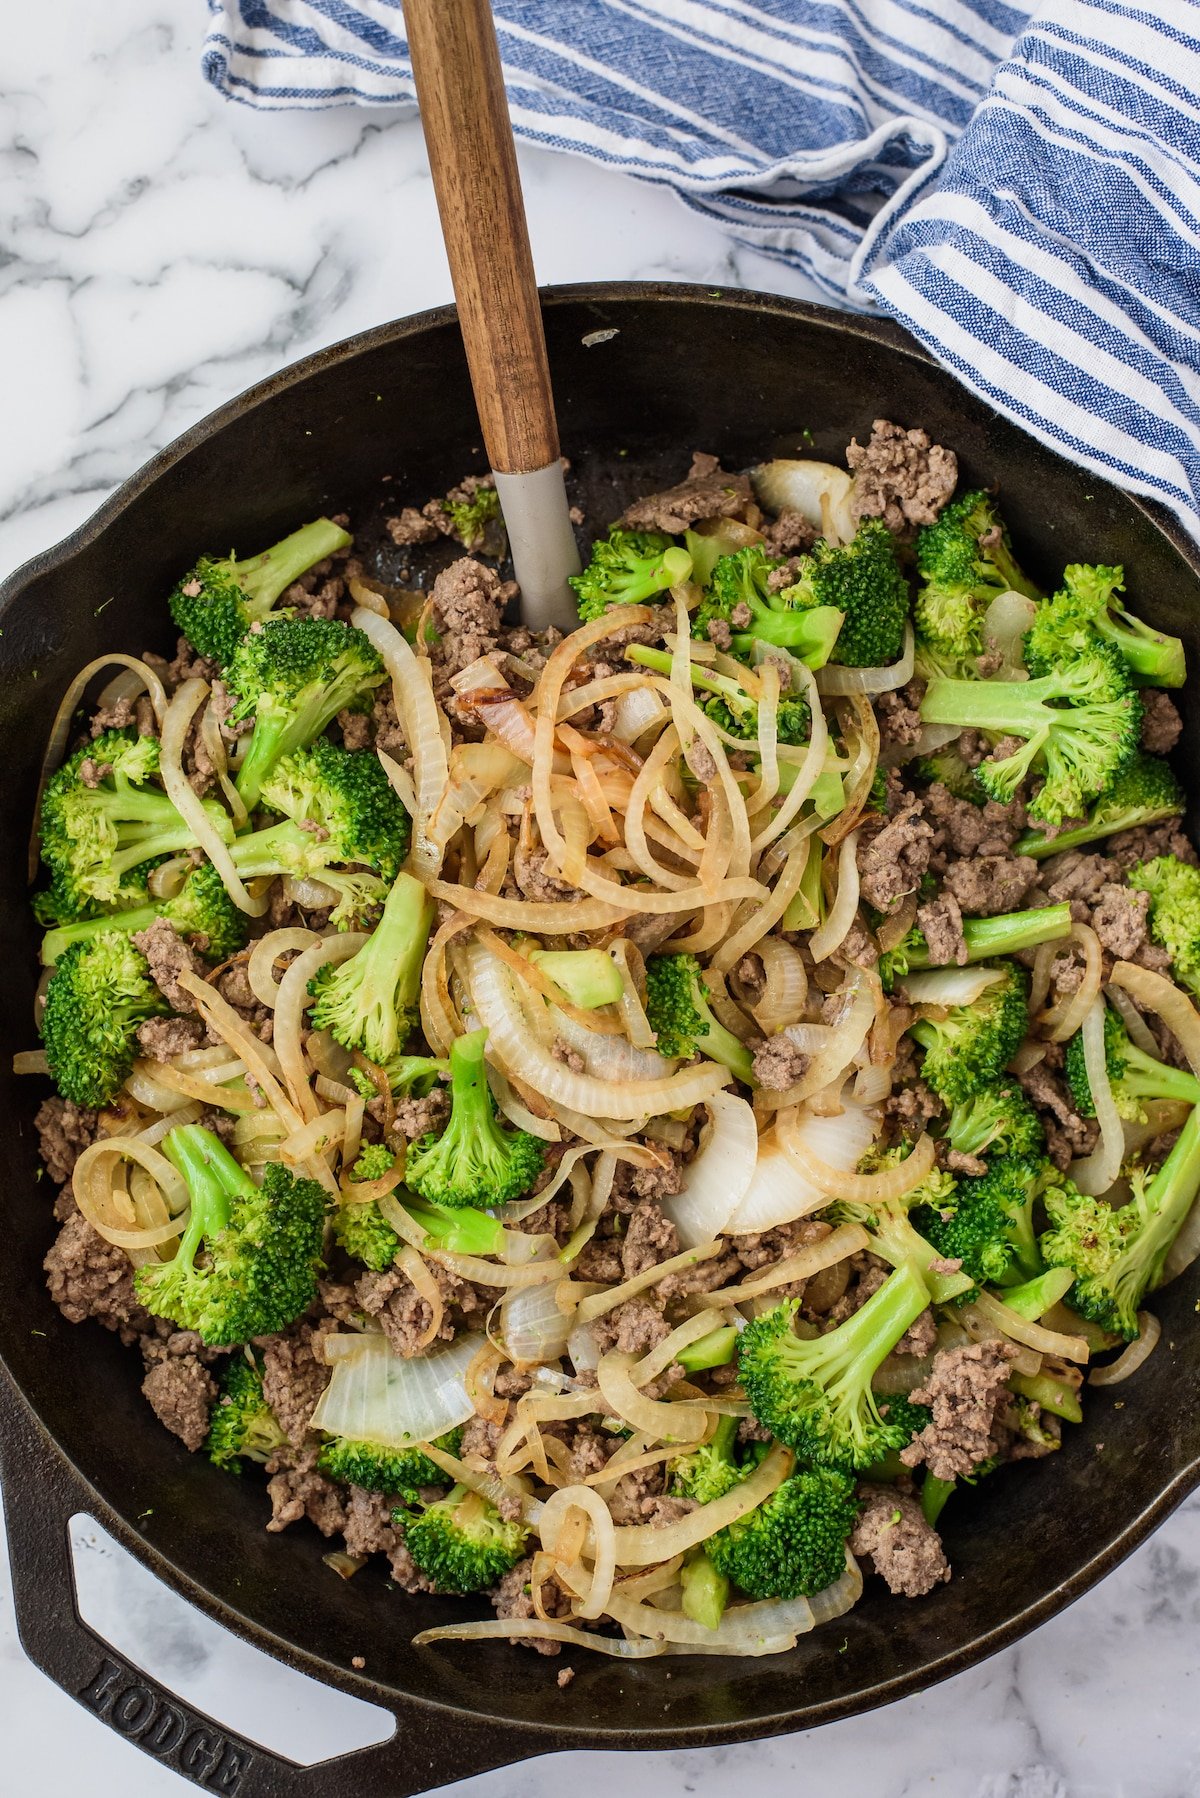 beef, broccoli and other things mixed together in a black pan